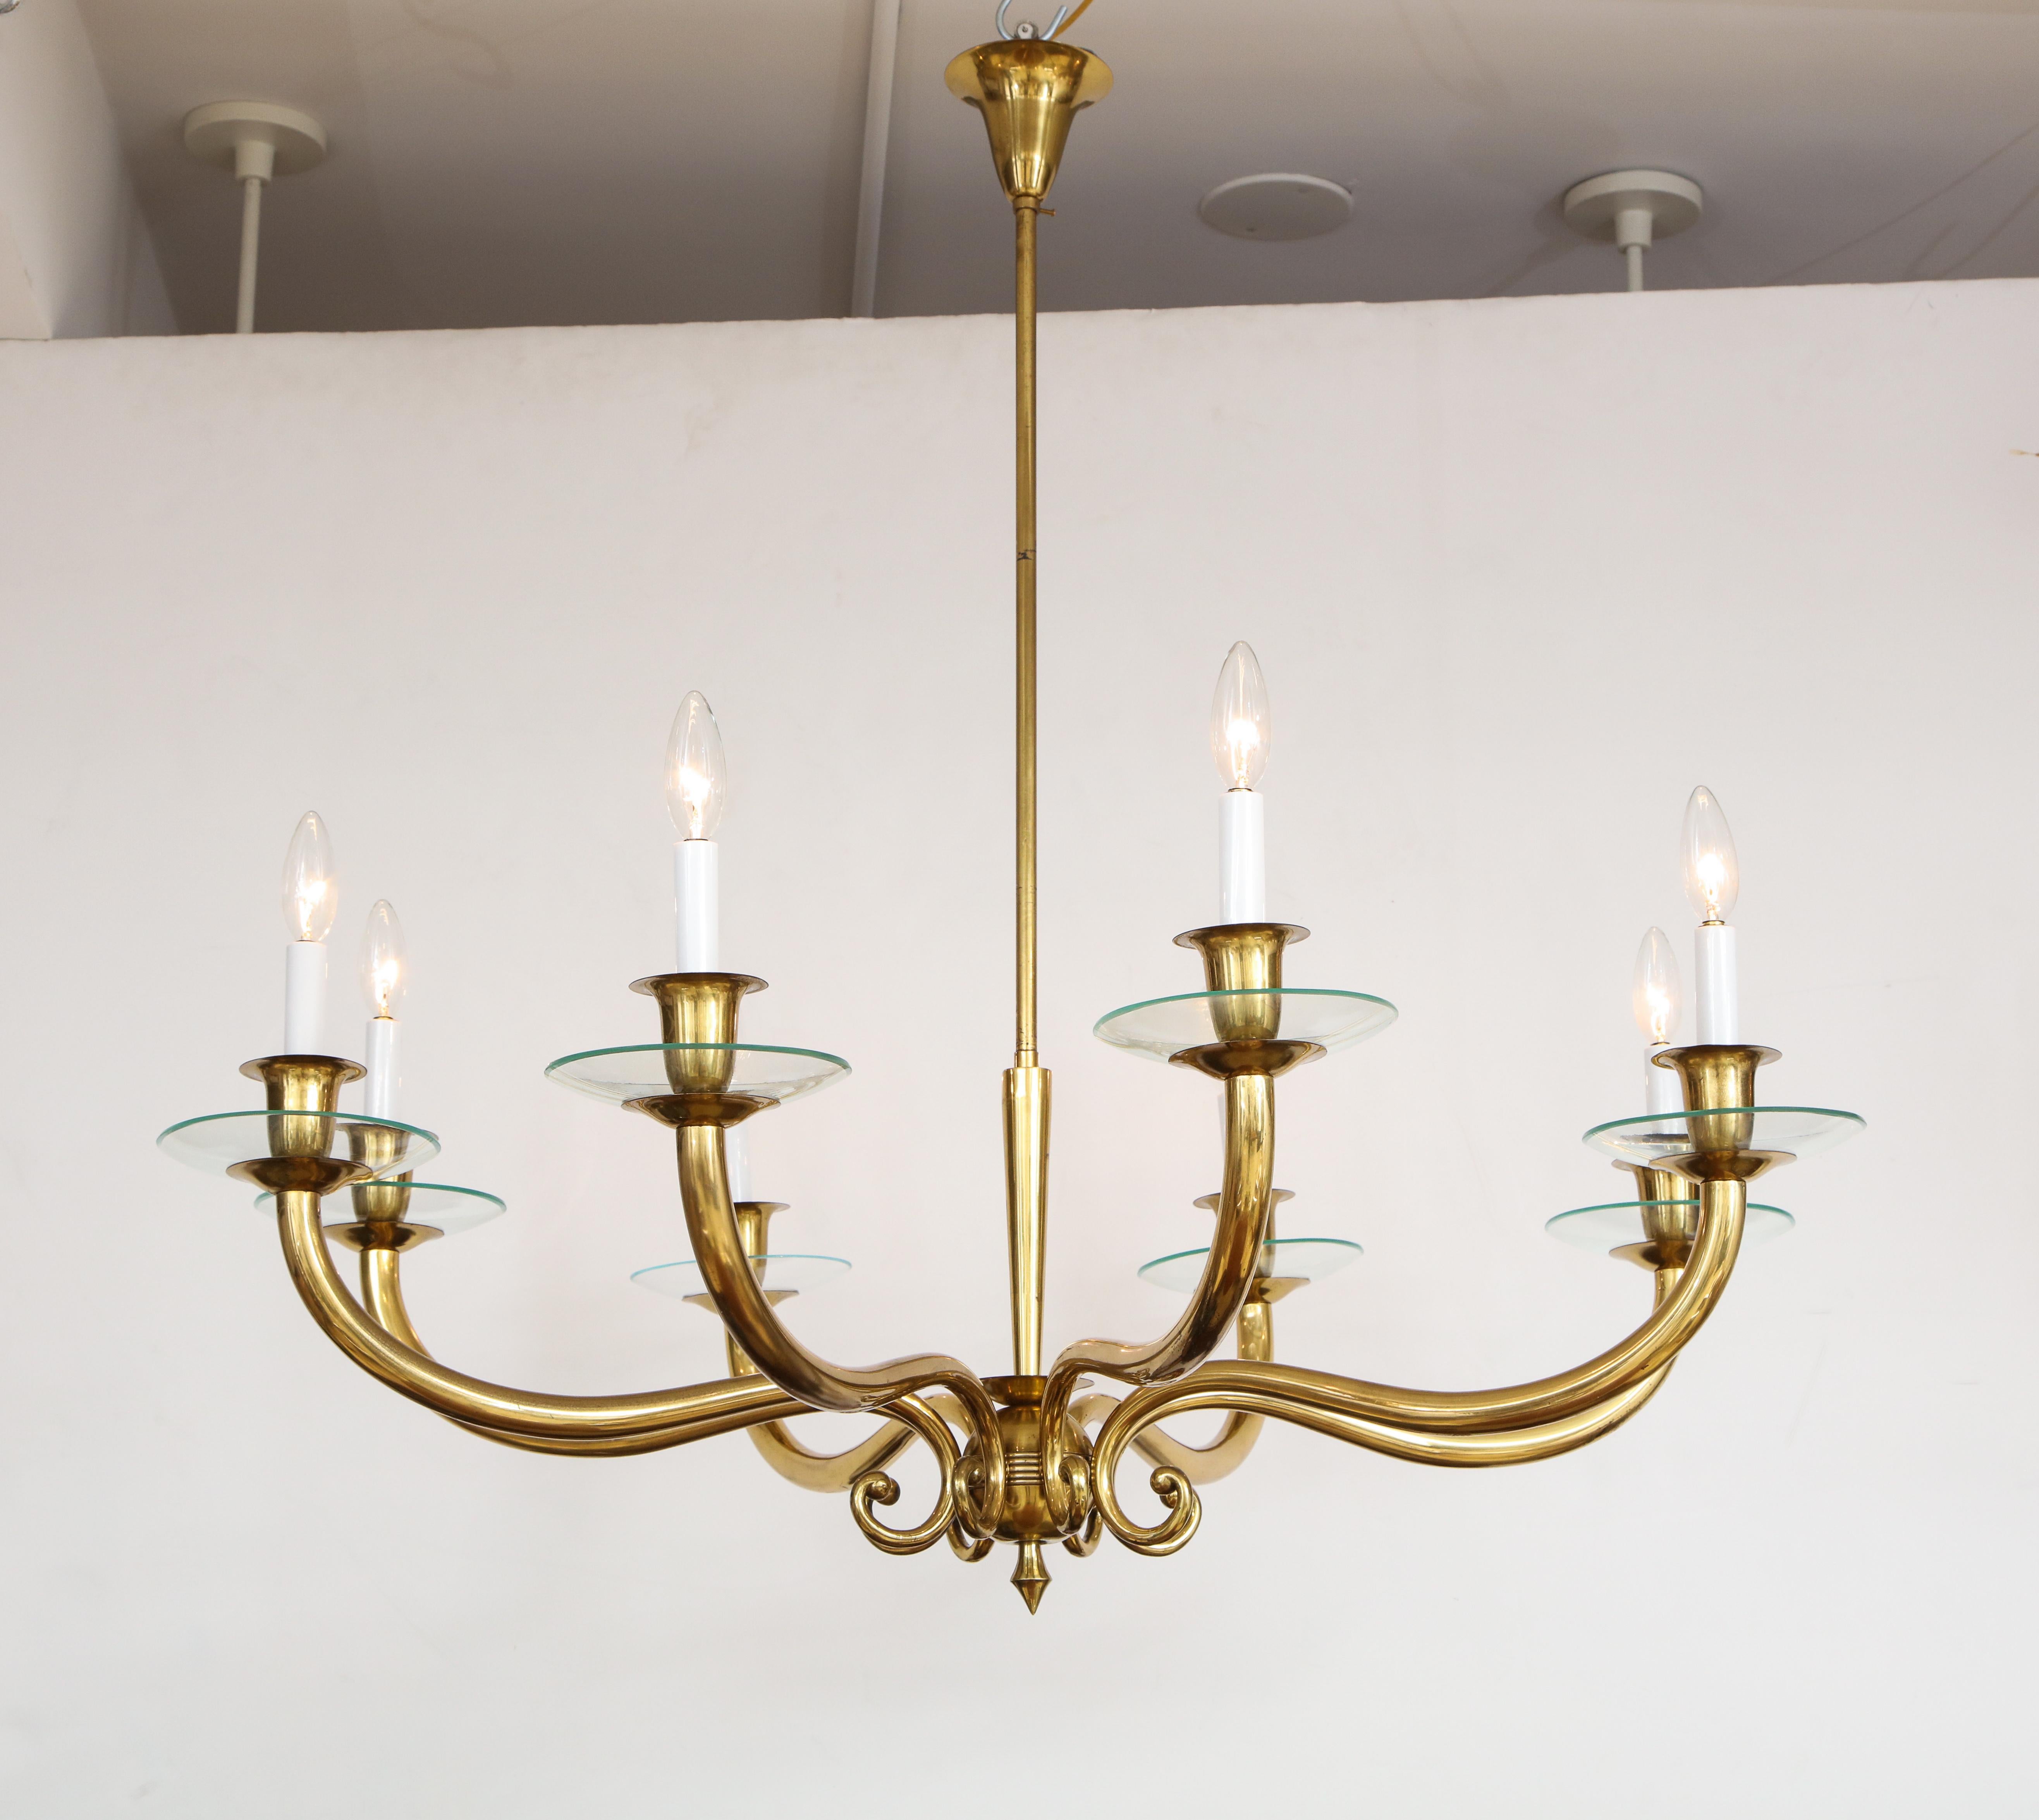 Italian midcentury brass eight-light chandelier with elegantly sloped arms surrounded by a central tapered shaft with ball shaped base.
Italy, circa 1950-60.
Size: 38” high x 40” diameter.